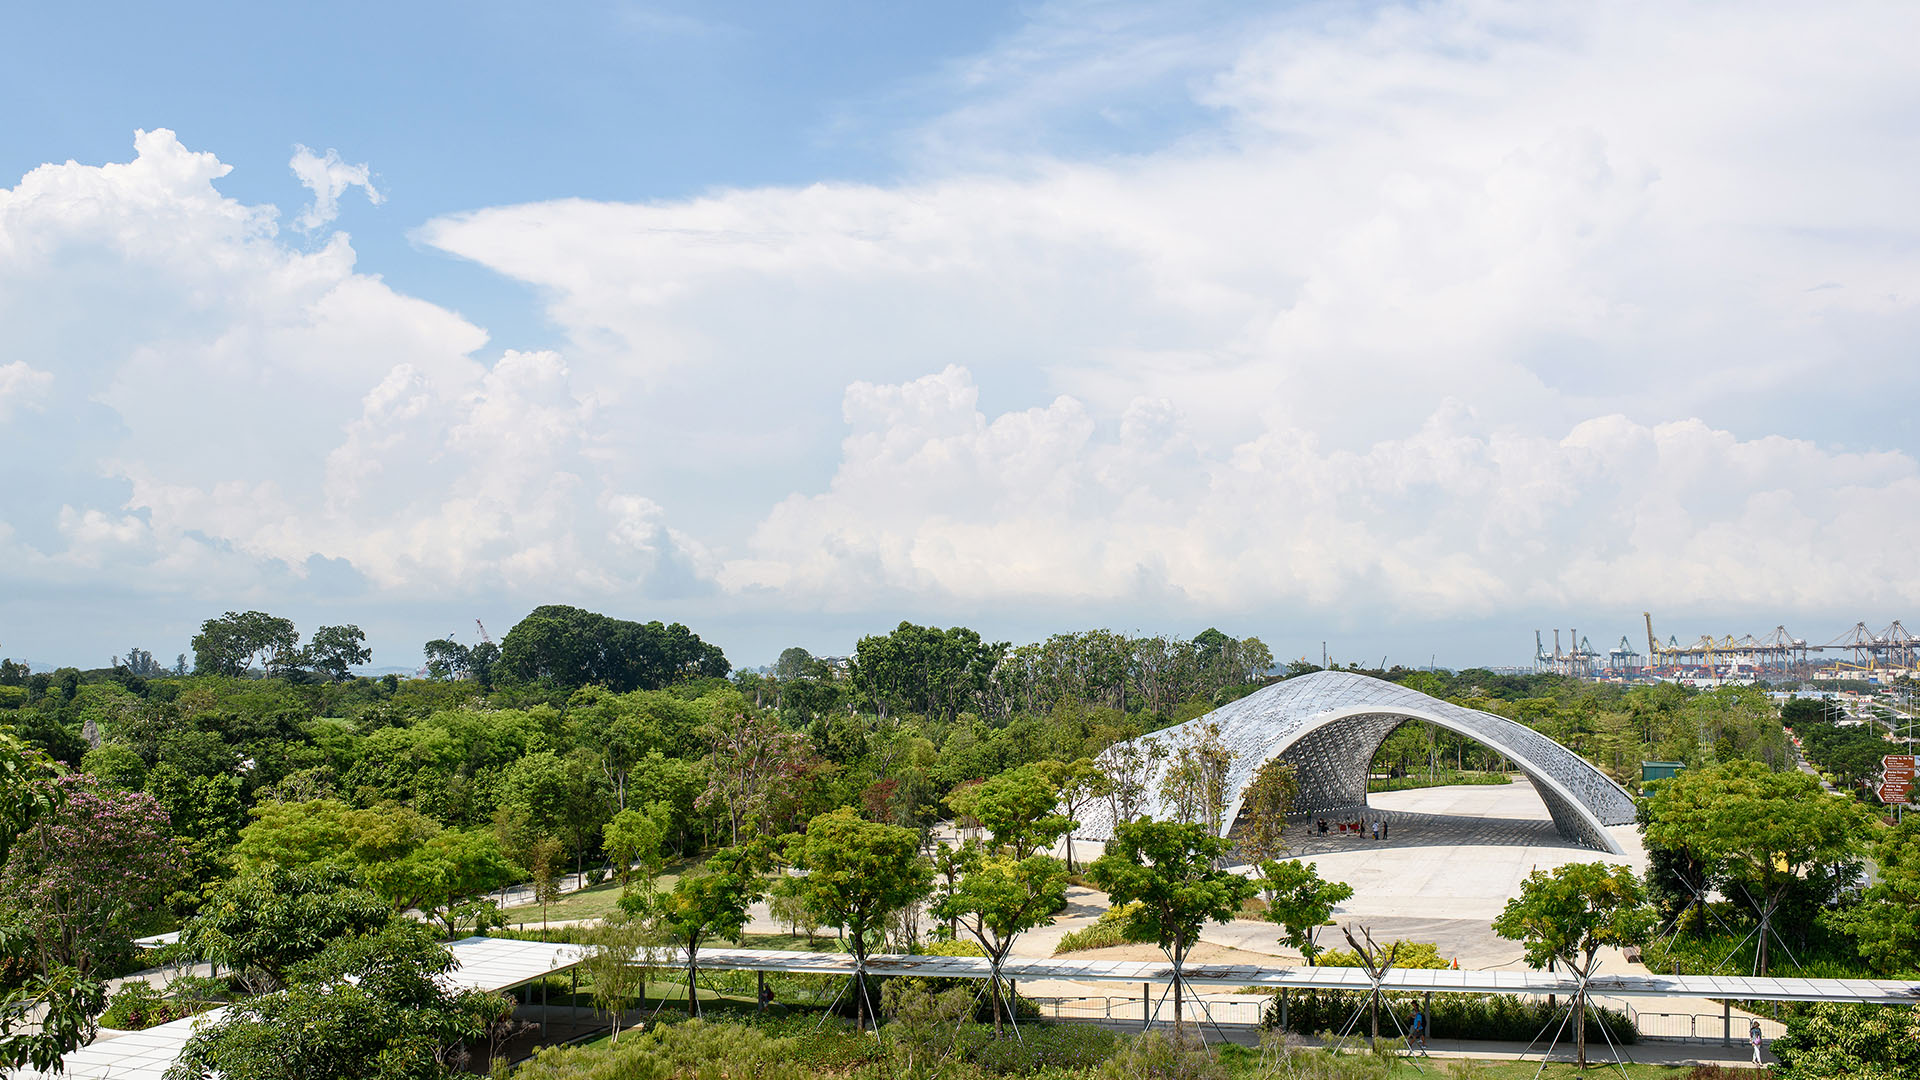 <p>The Future of Us Pavilion as a permanent Singapore landmark, view from north.</p>